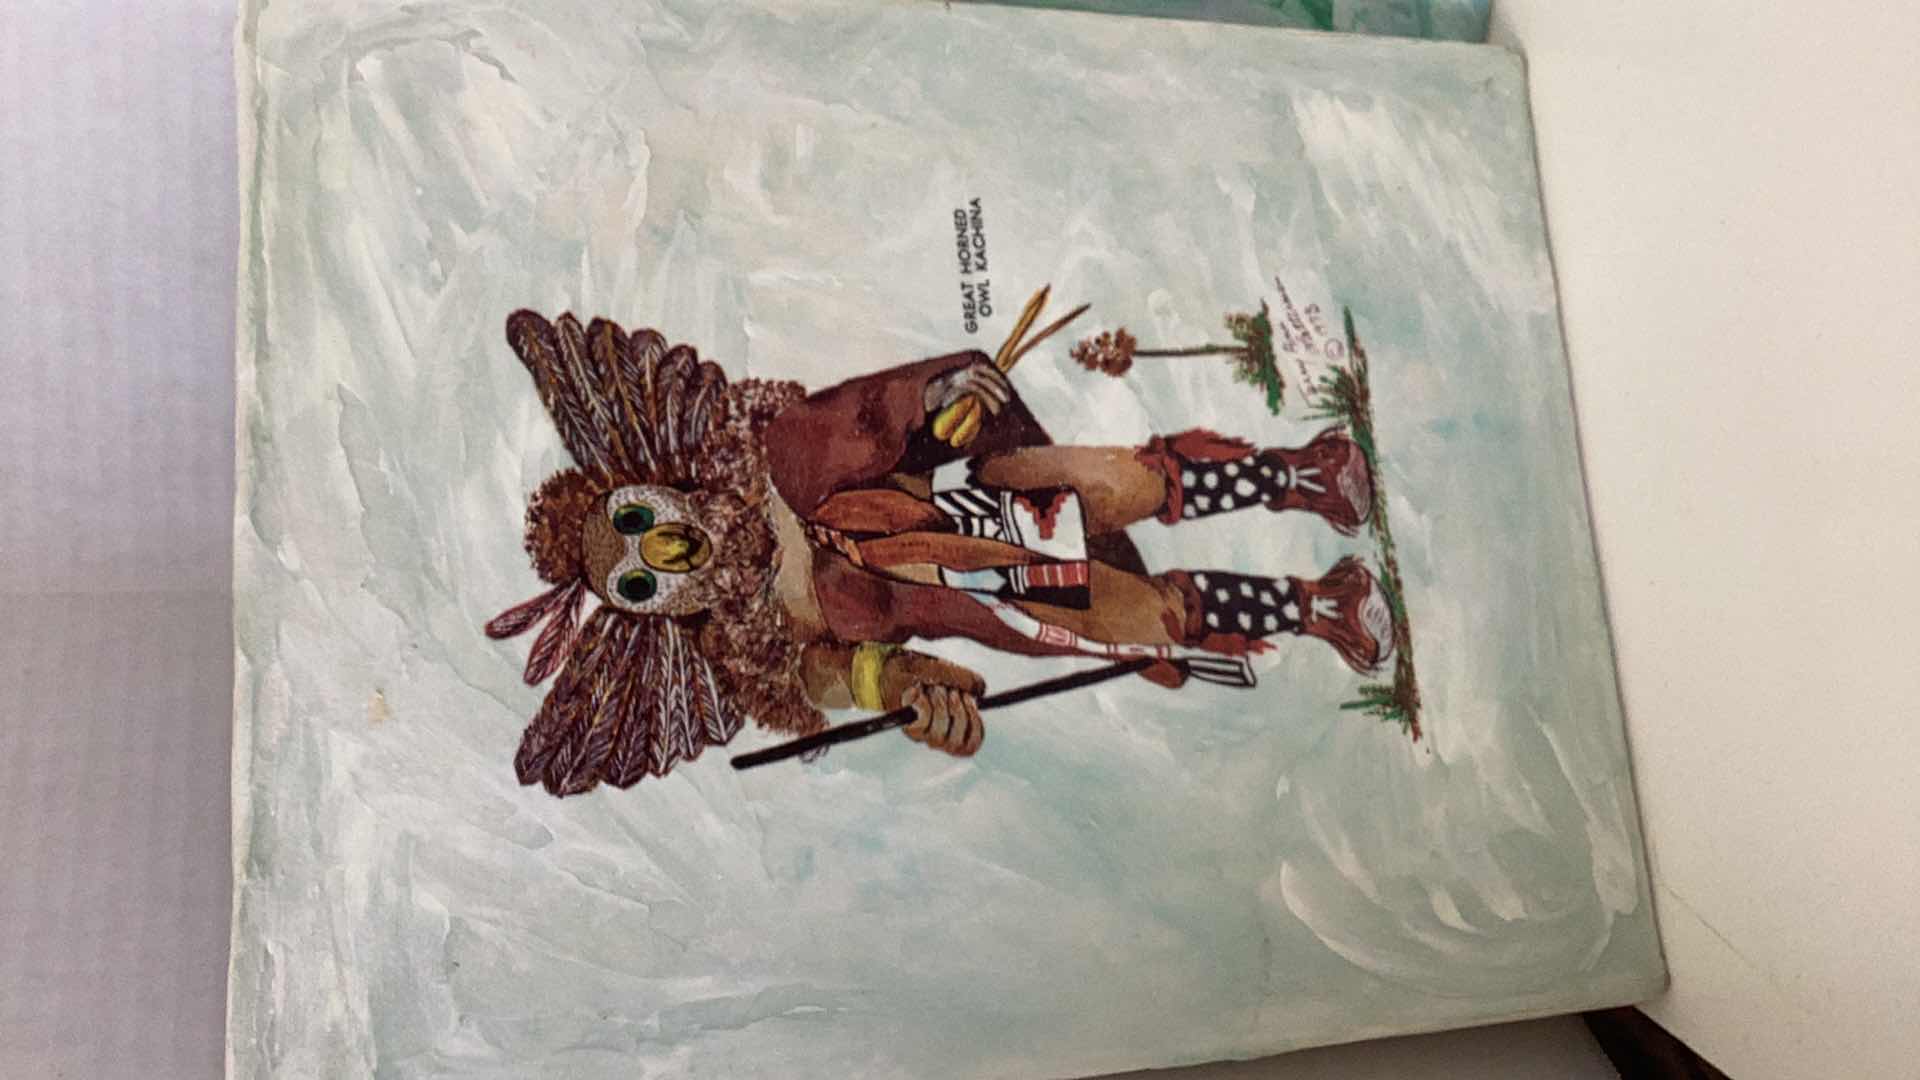 Photo 2 of THREE VINTAGE 1973 TERRY ANN LATTERMAN HAND PAINTED KACHINA PAINTINGS 11” X H 14” $40 EACH